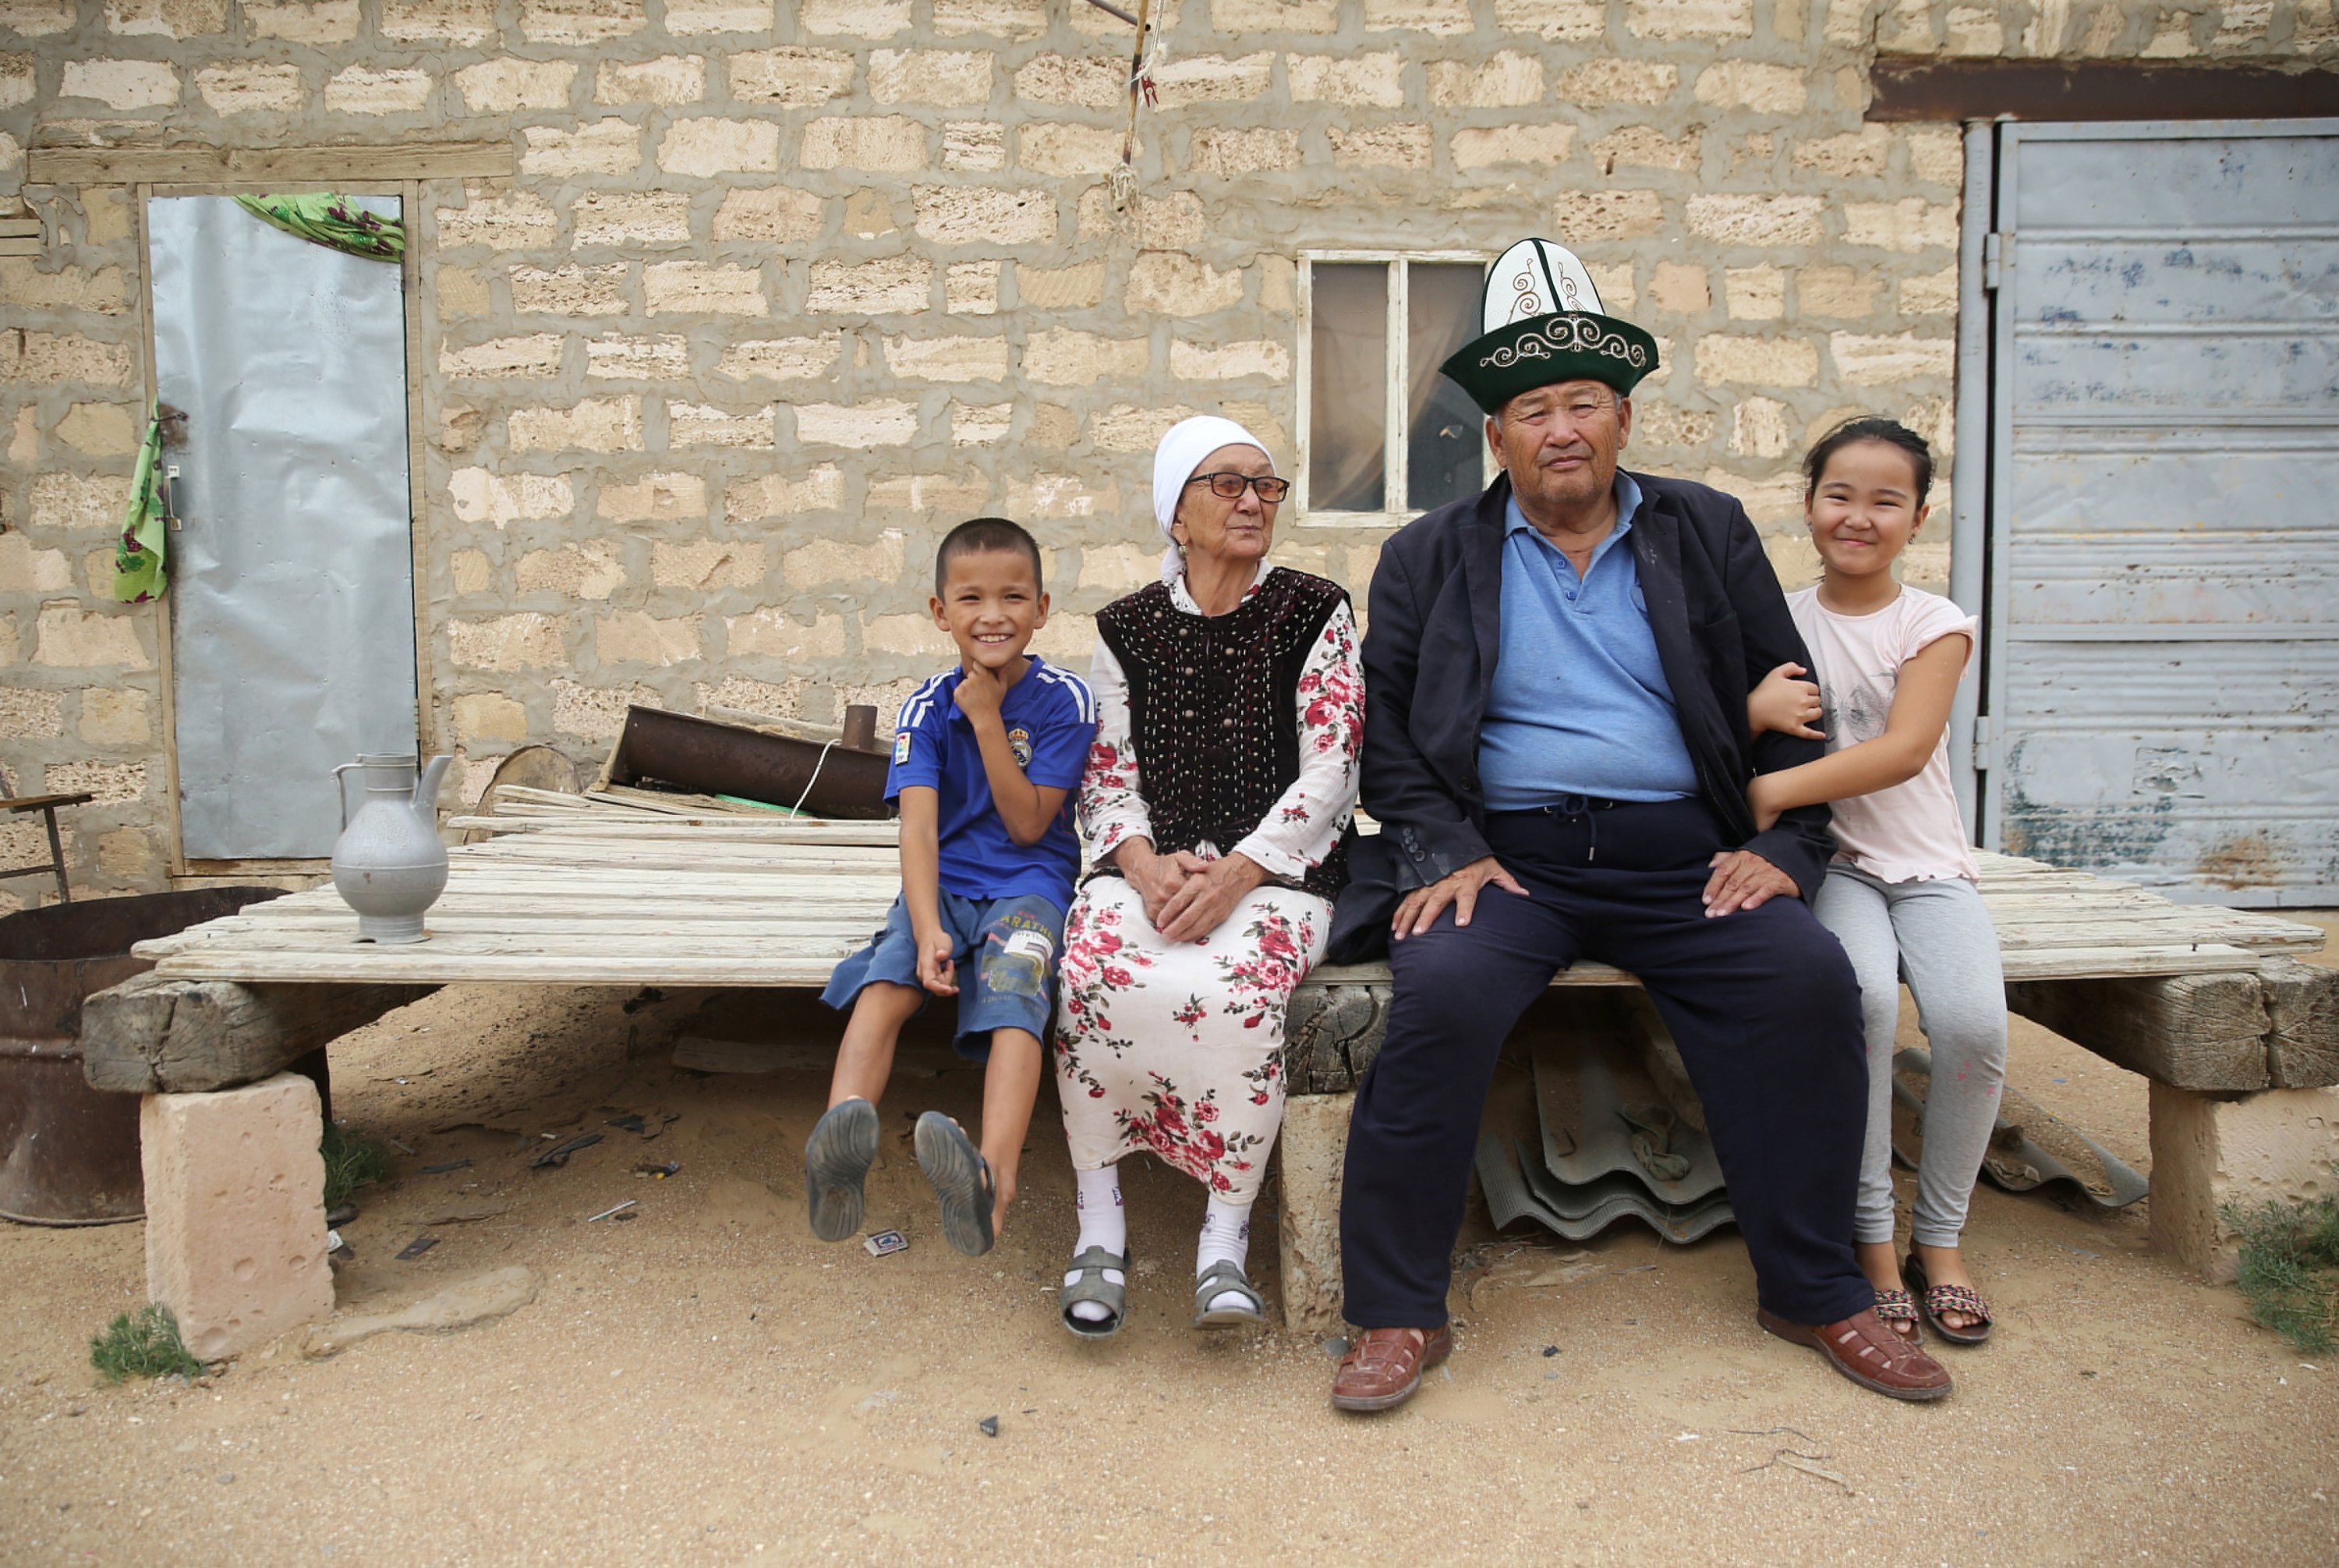 Farmer Gabidolla Kalynbayuly, 70, poses with his family members next to their house in the village of Akshymyrau amid severe drought in Mangistau Region, Kazakhstan, on July 27, 2021. (Reuters Photo)